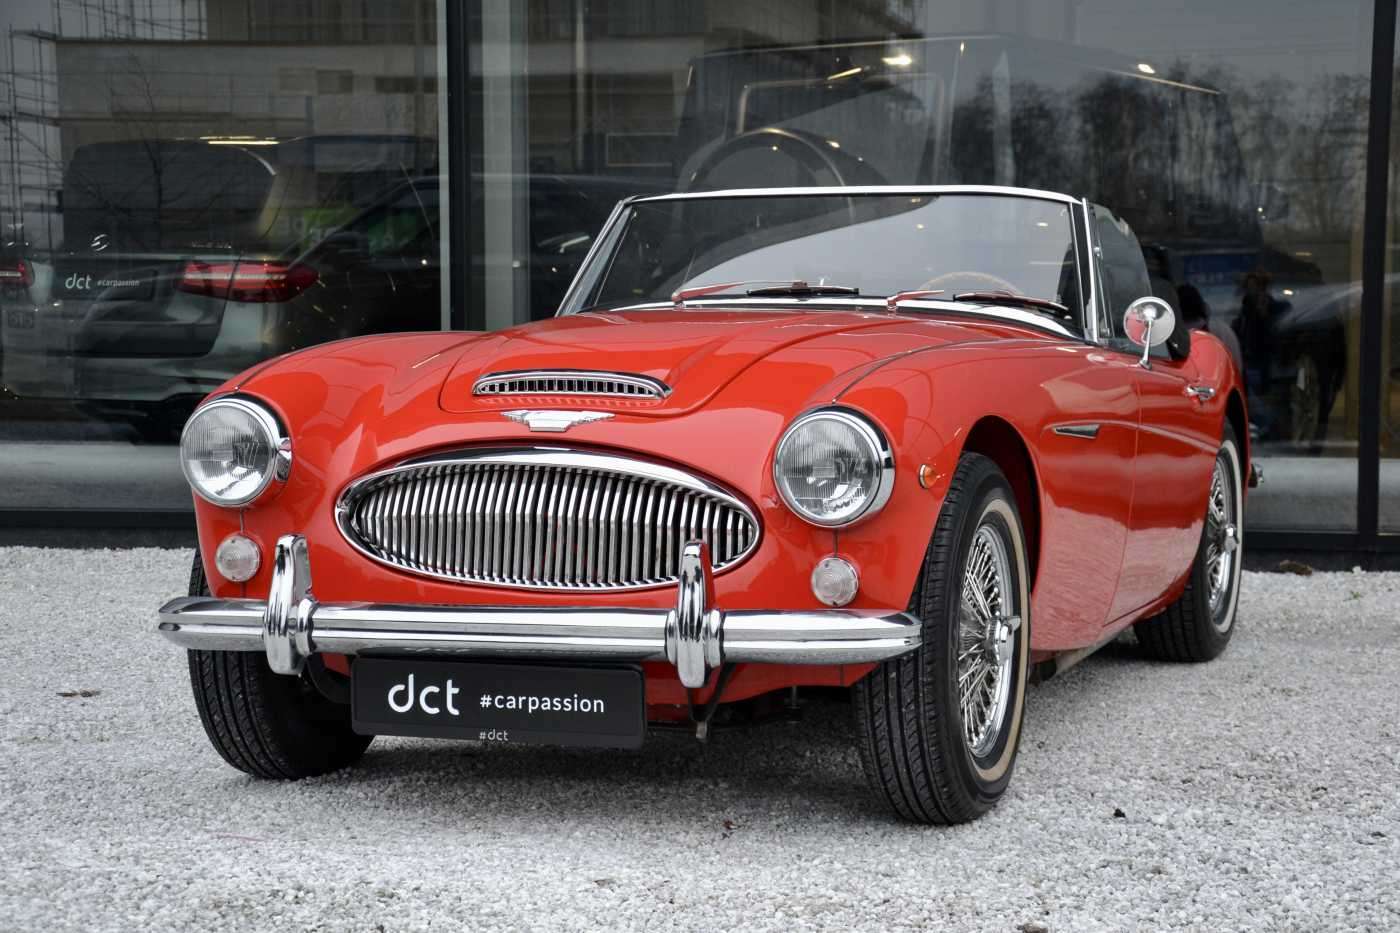 Austin-Healey 3000 Coupe in Red used in Belgique for € 79,900.-